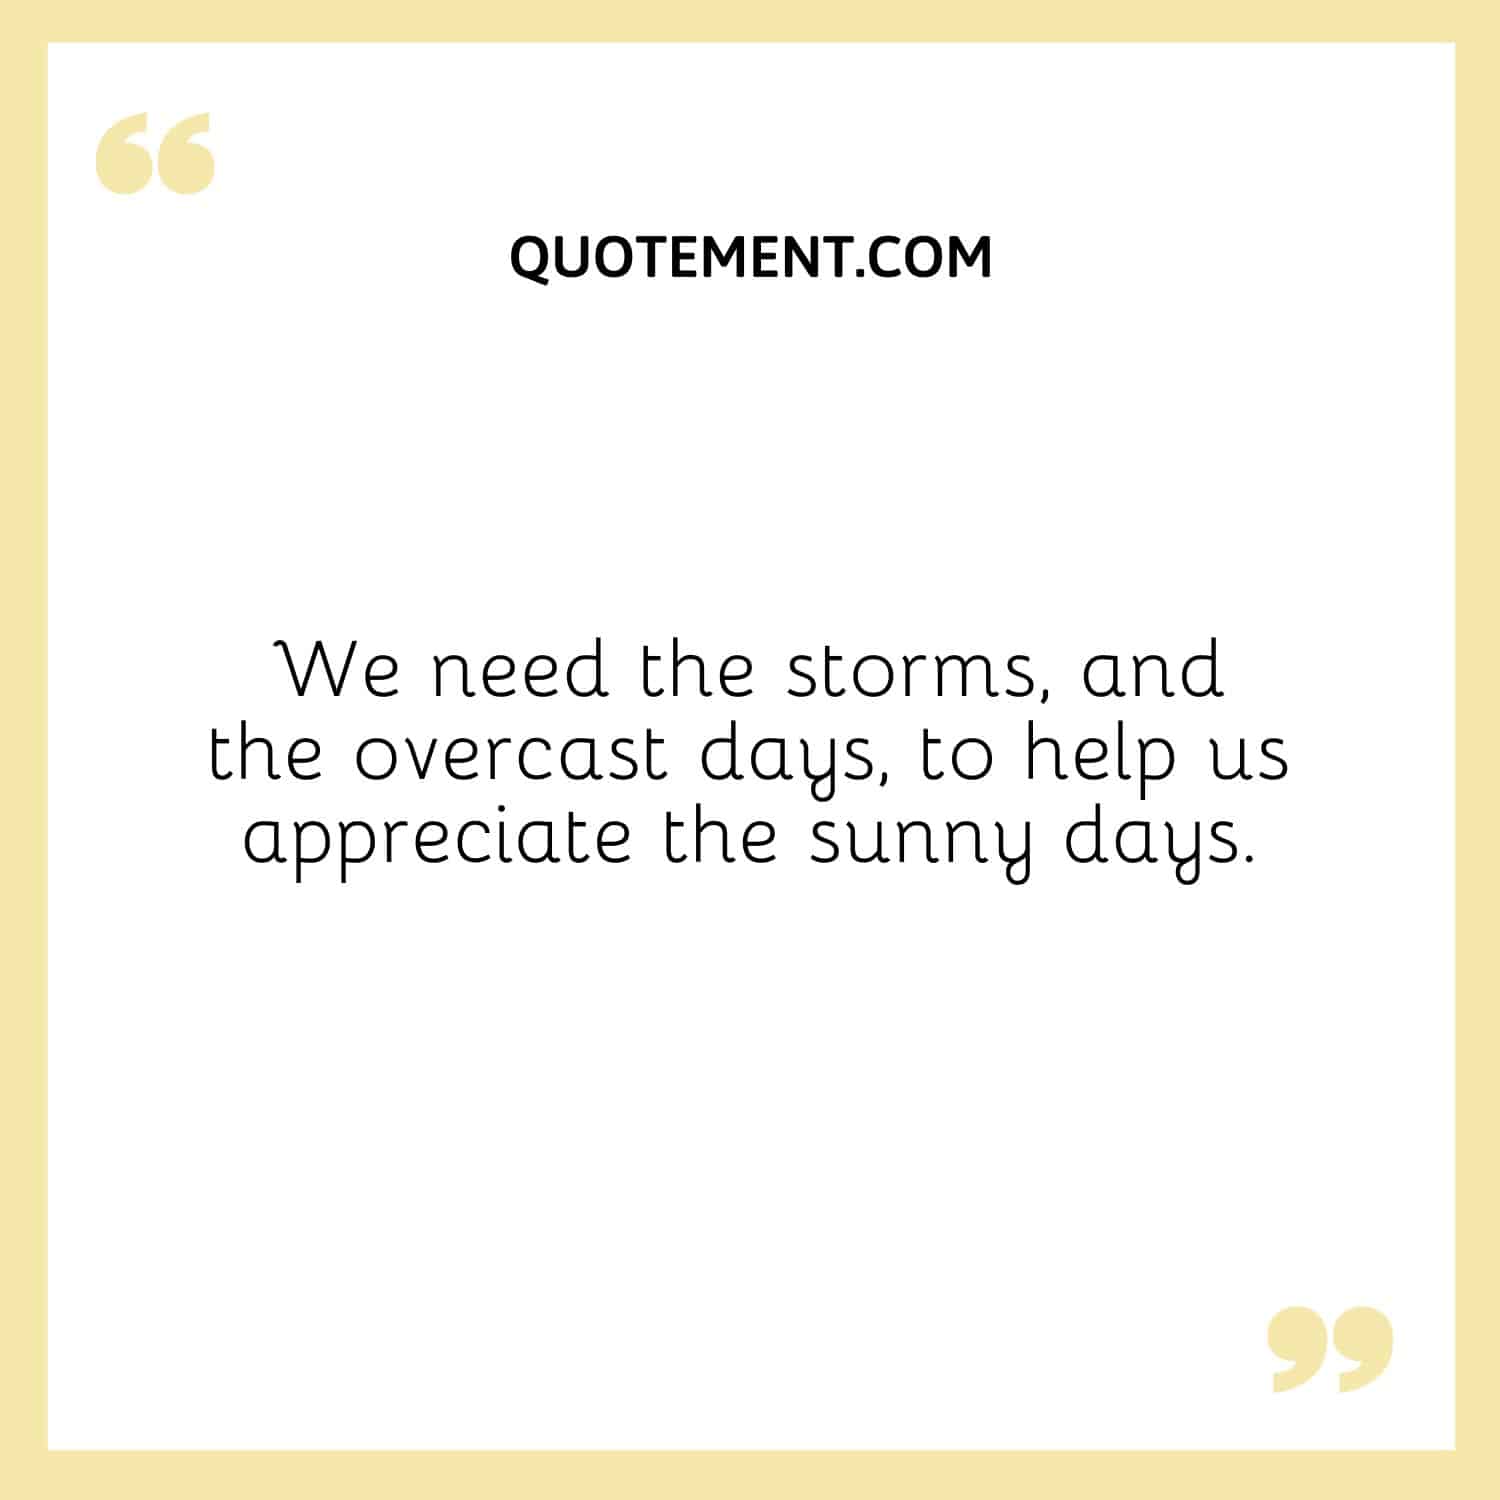 We need the storms, and the overcast days, to help us appreciate the sunny days.